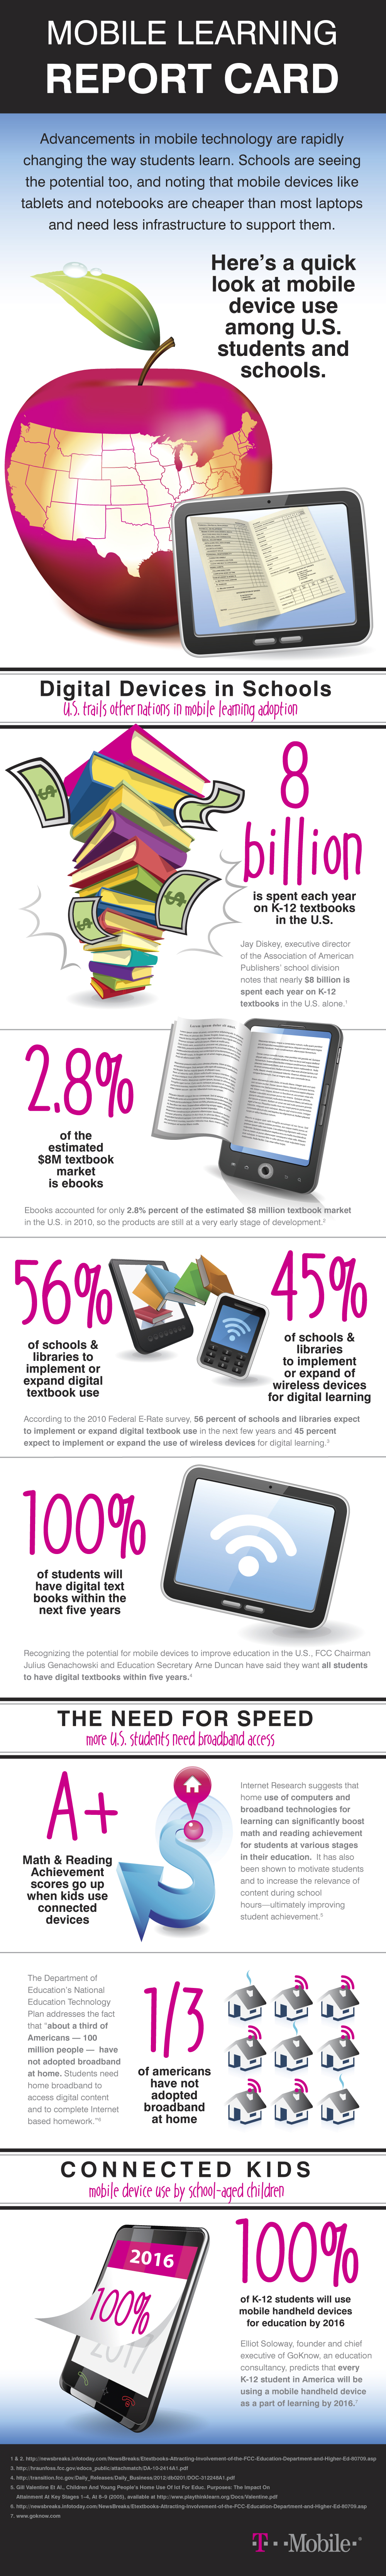 Mobile Learning Report Card (Infographic) - Kevin Corbett